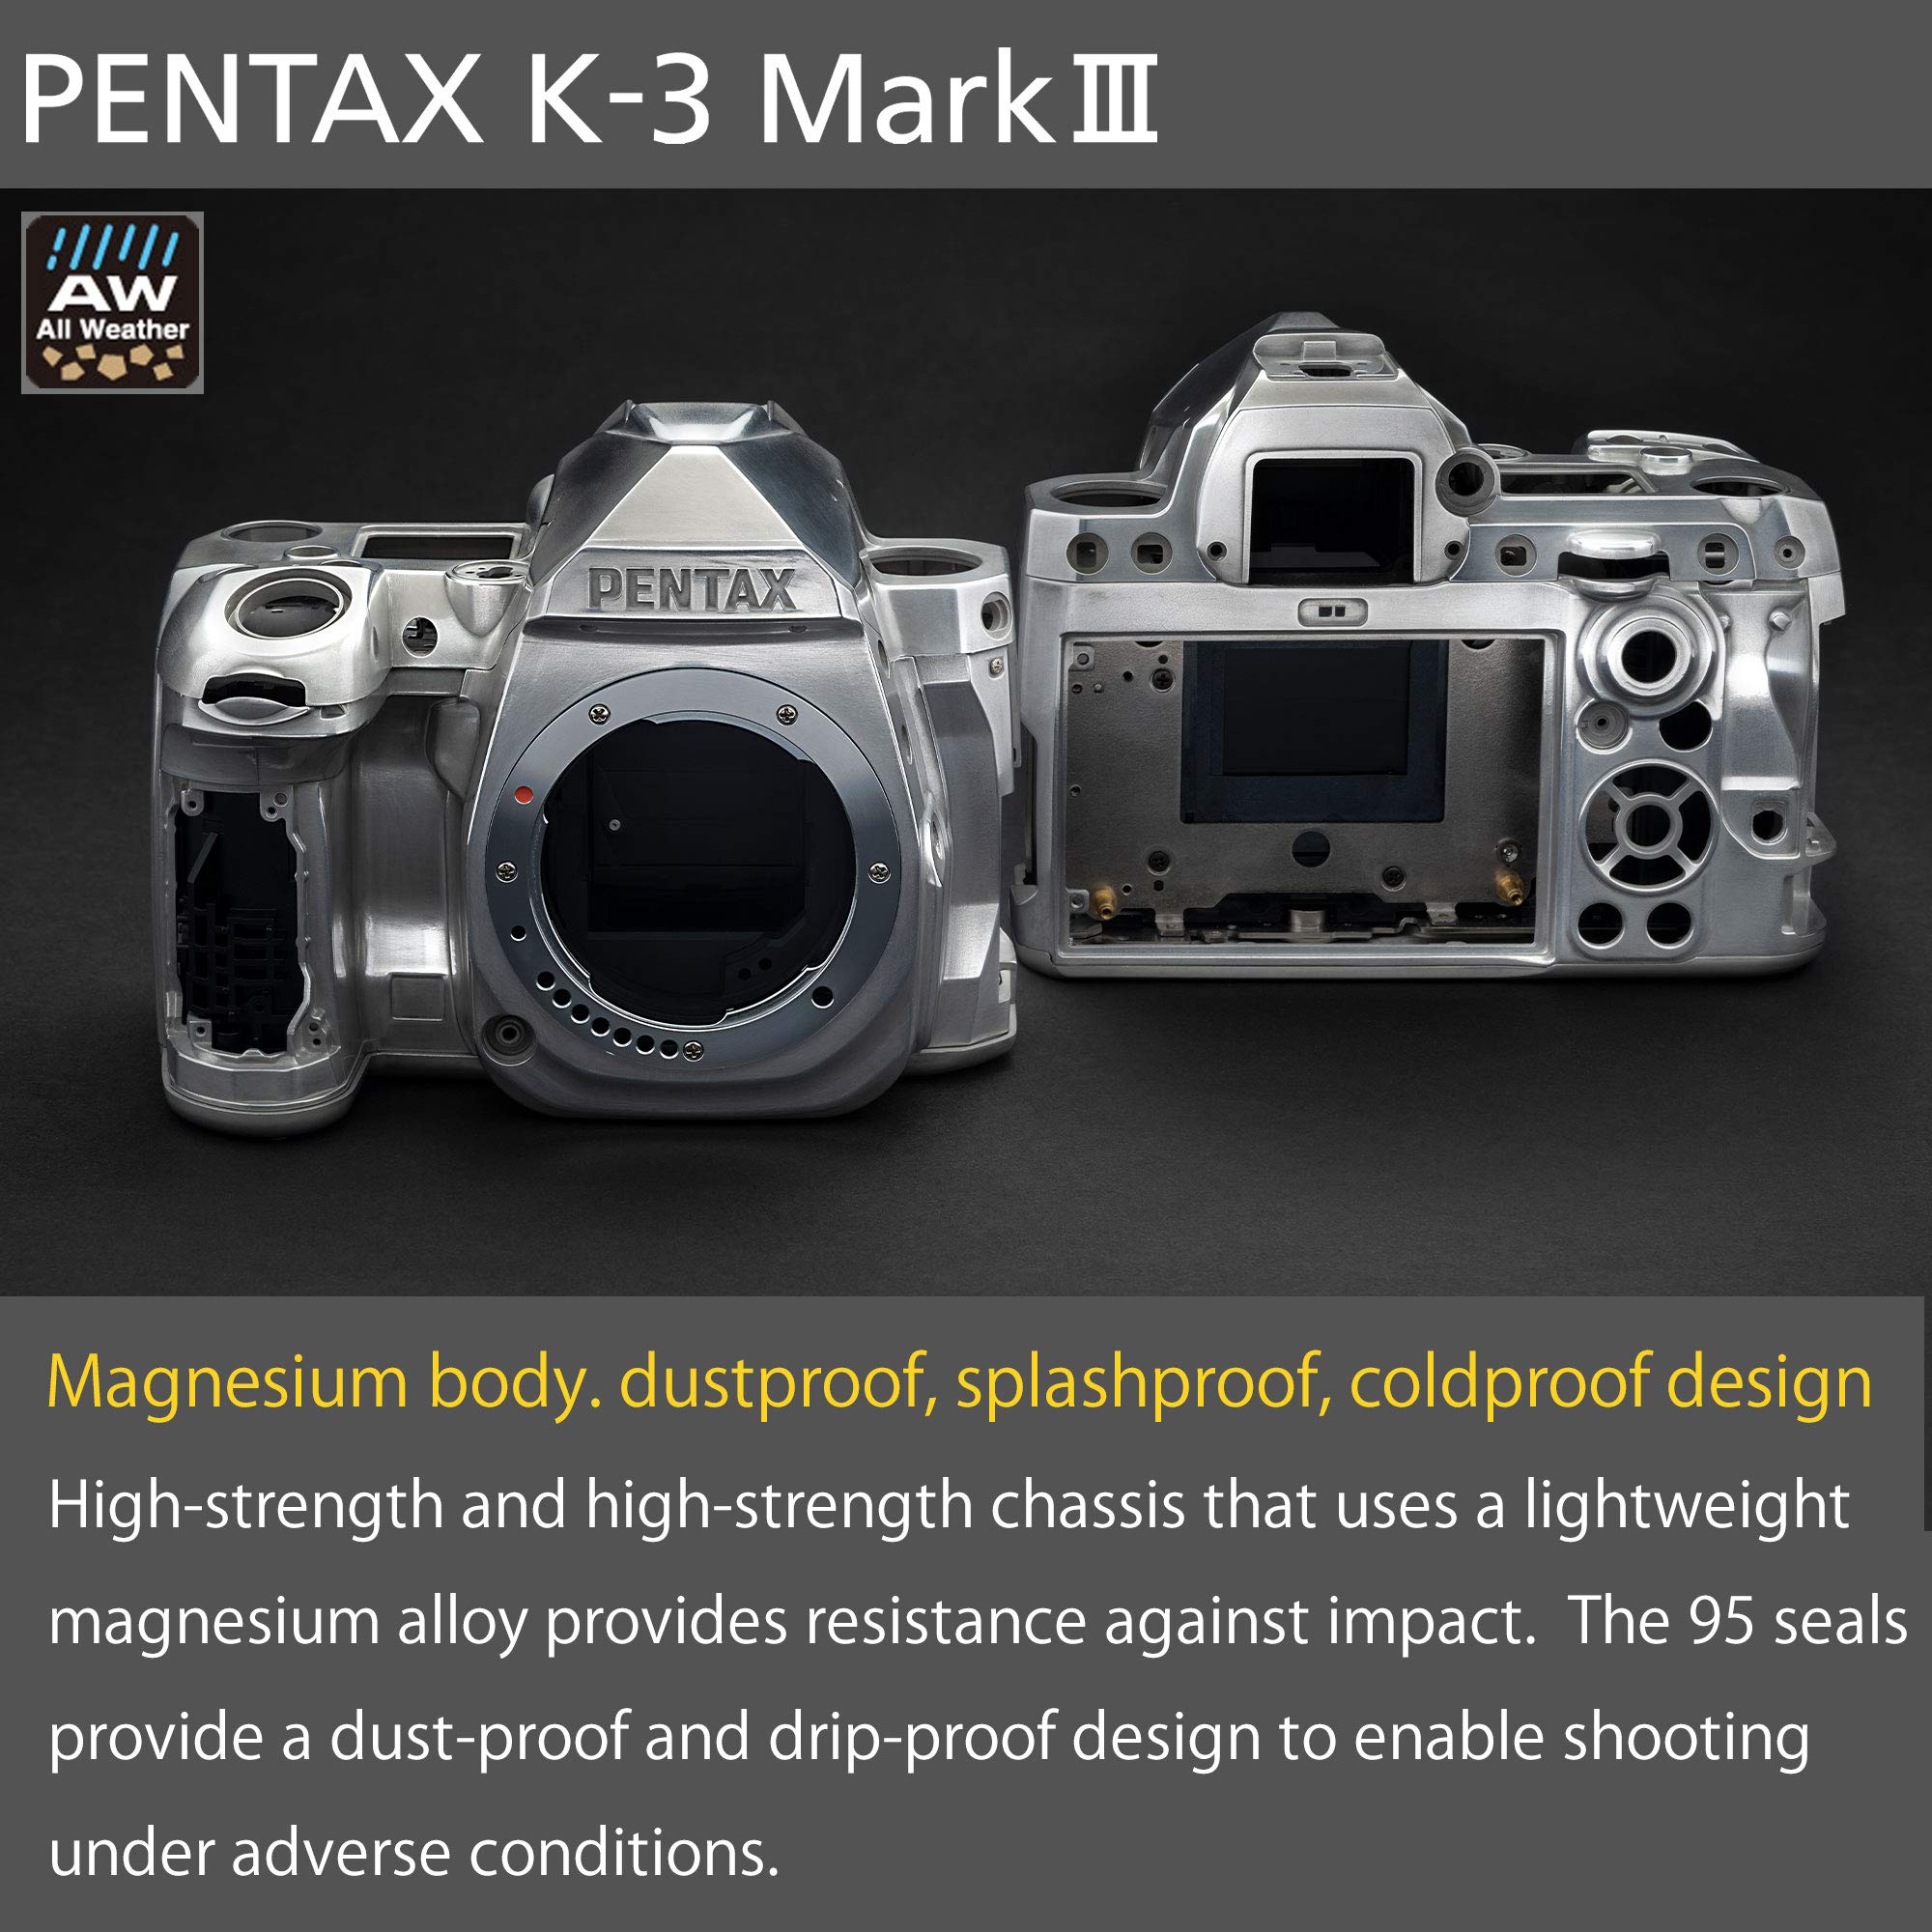 Pentax K-3 Mark III Flagship APS-C Black Camera Body - 12fps, Touch Screen LCD, Weather Resistant Magnesium Alloy Body with in-Body 5-Axis Shake Reduction. 1.05x Optical viewfinder with 100% FOV